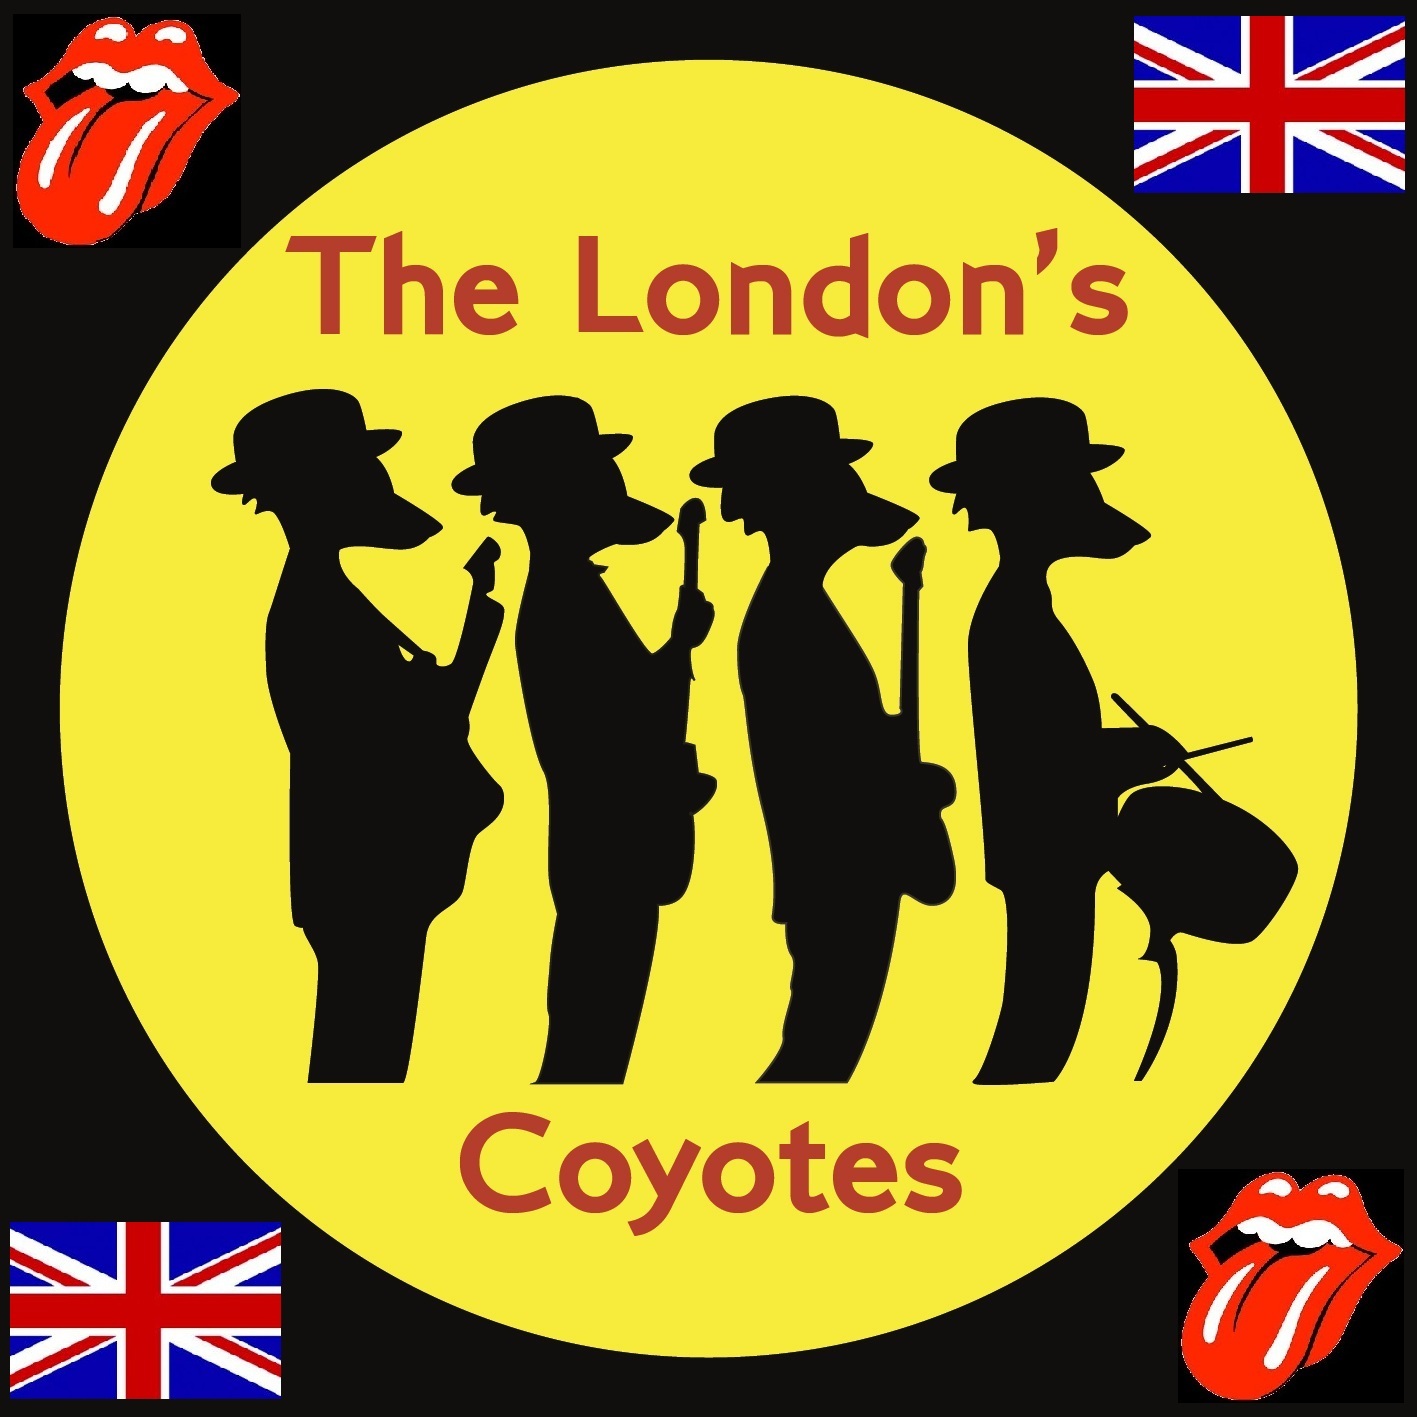 London's Coyotes